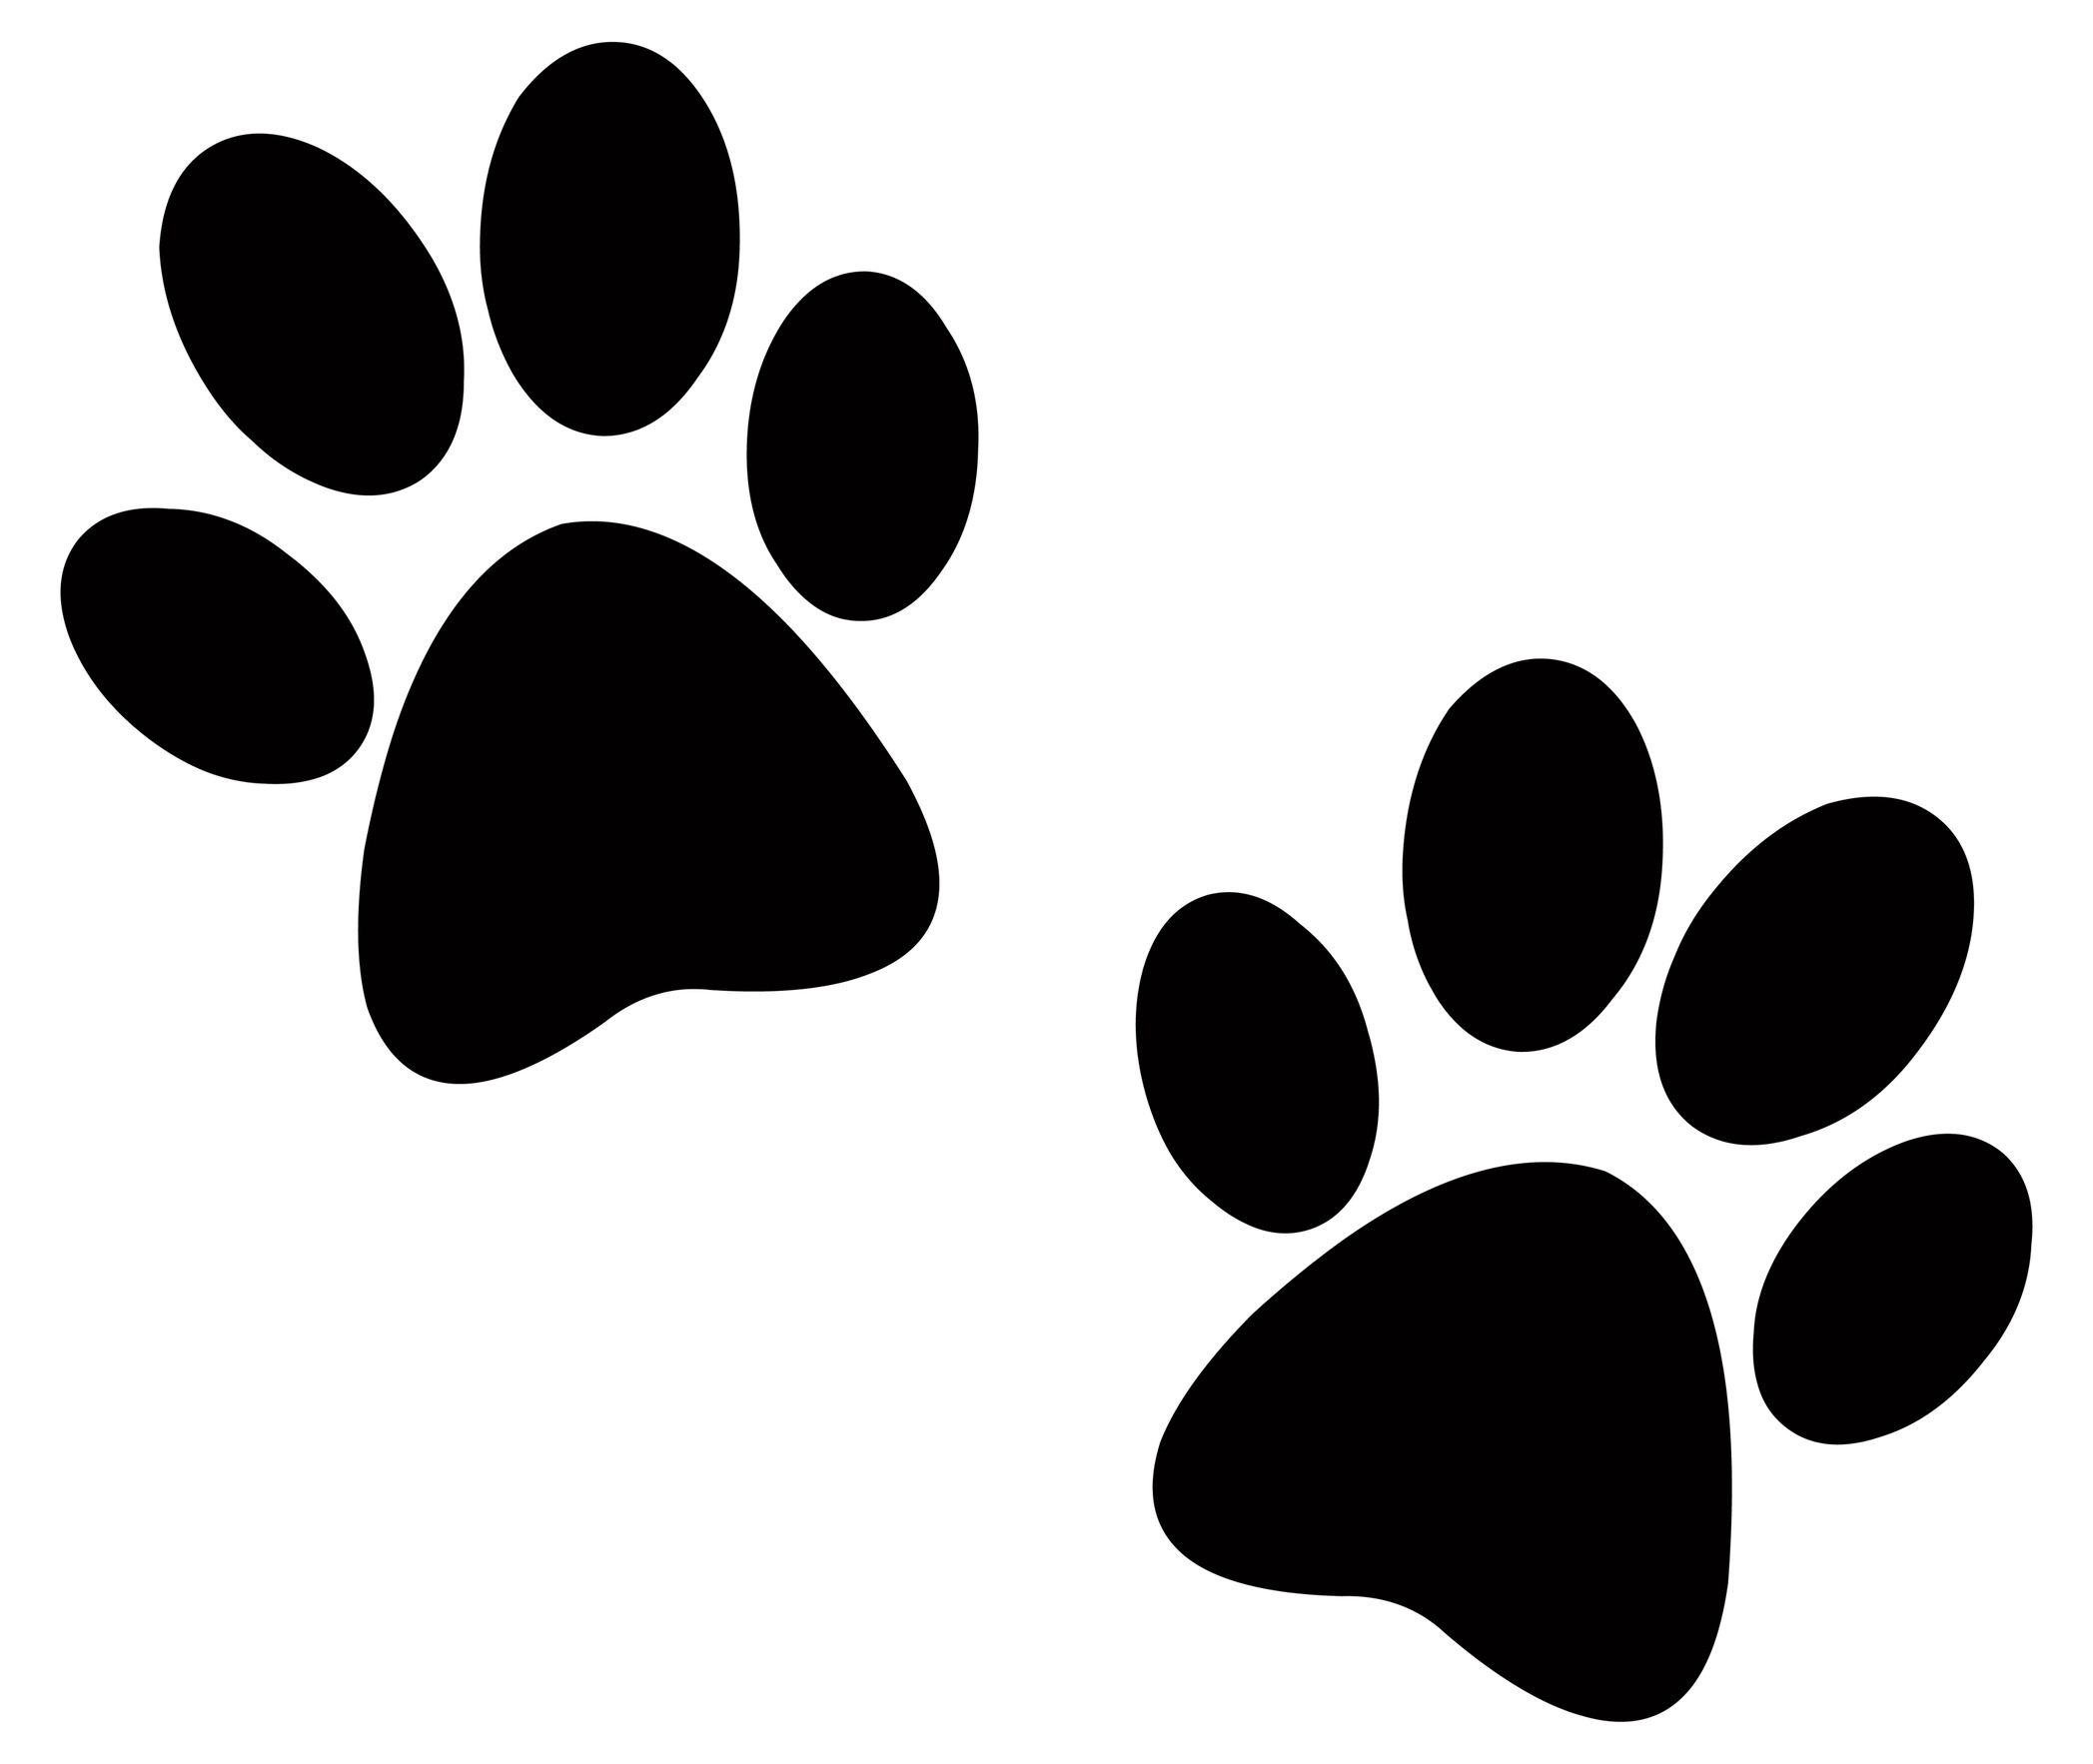 Animal paw prints office clipart - ClipArt Best - ClipArt Best